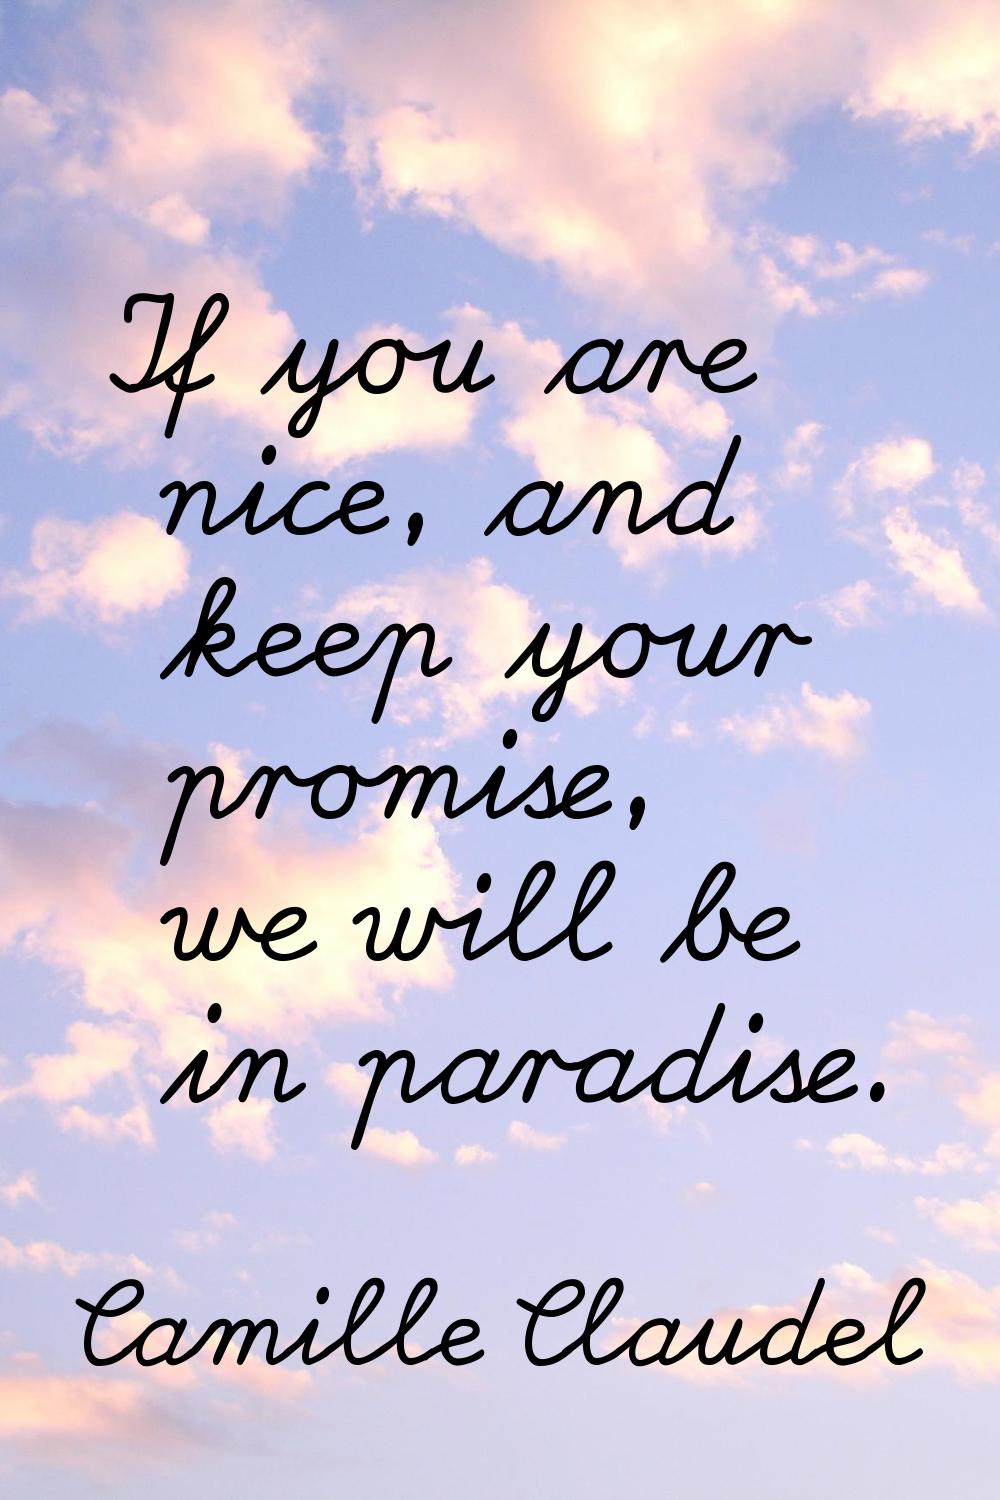 If you are nice, and keep your promise, we will be in paradise.